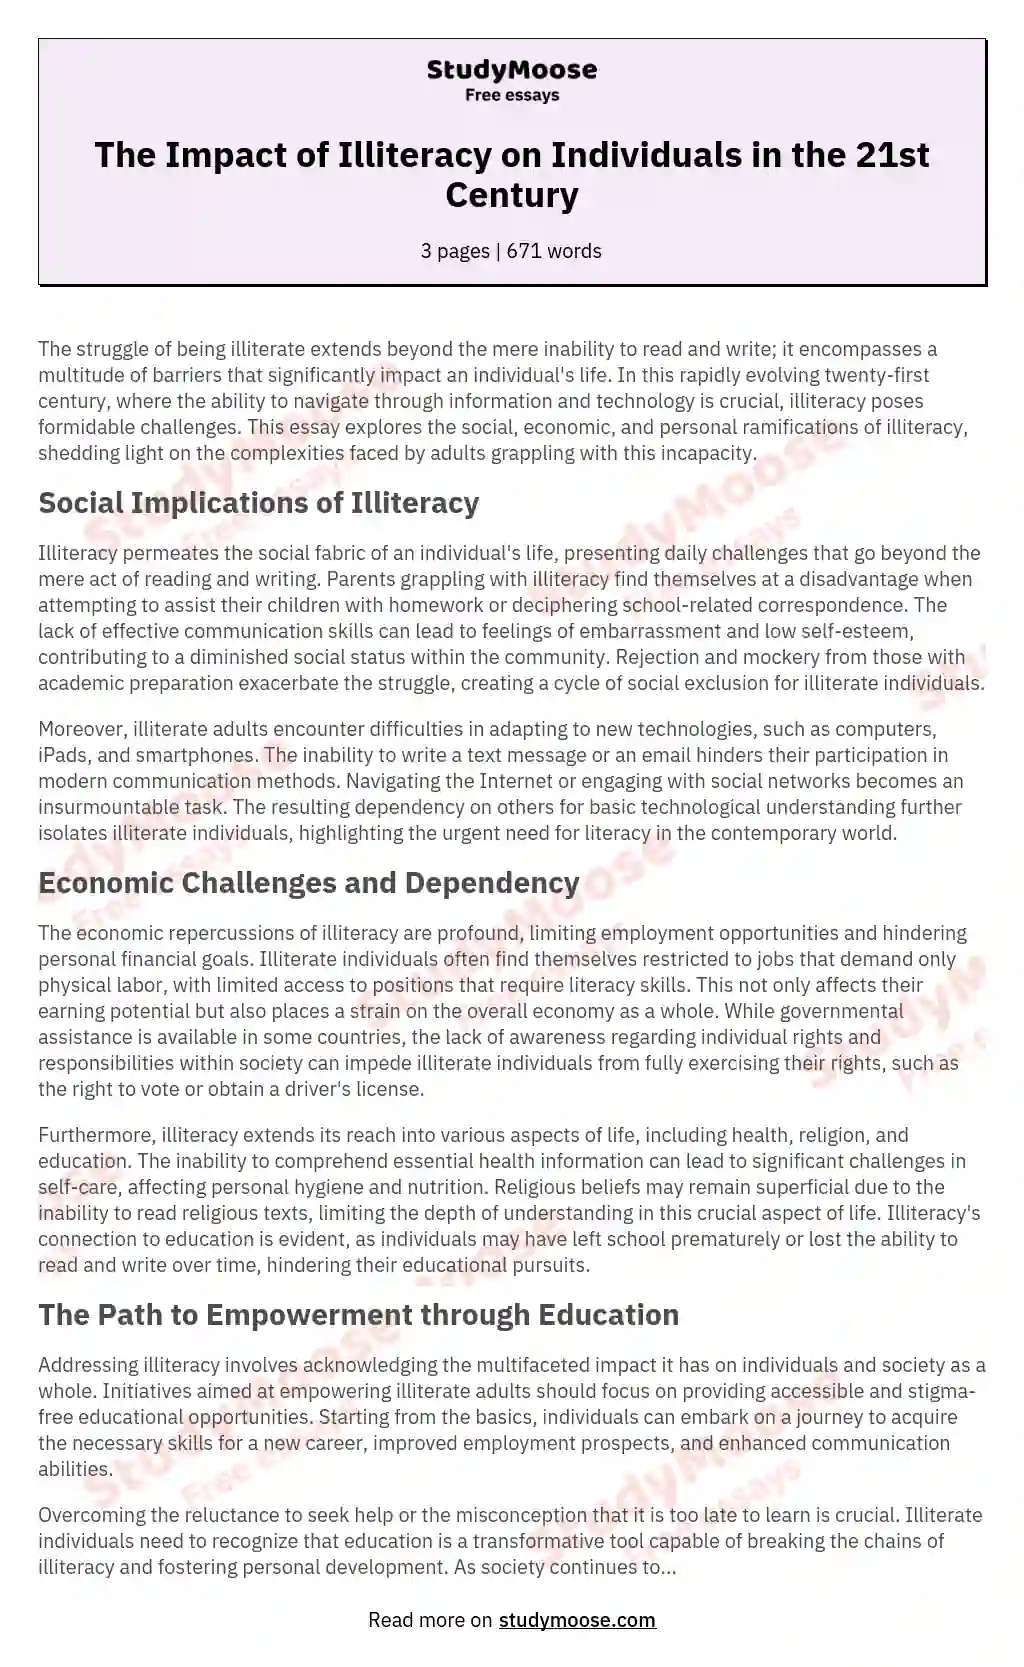 The Impact of Illiteracy on Individuals in the 21st Century essay